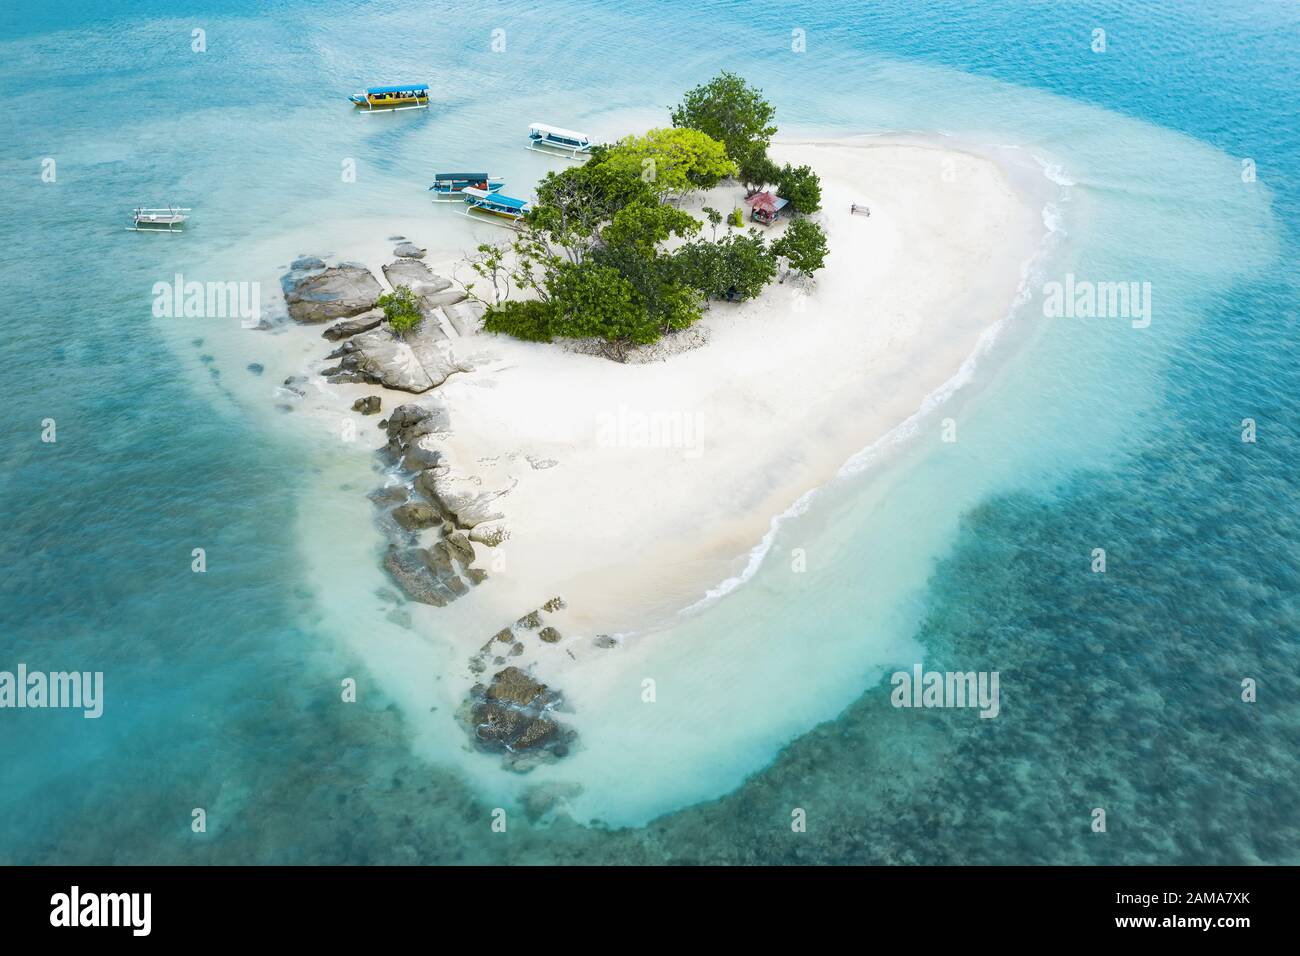 View from above, stunning aerial view of Gili Kedis with a beautiful white sand beach bathed by a turquoise and crystal clear water. Stock Photo